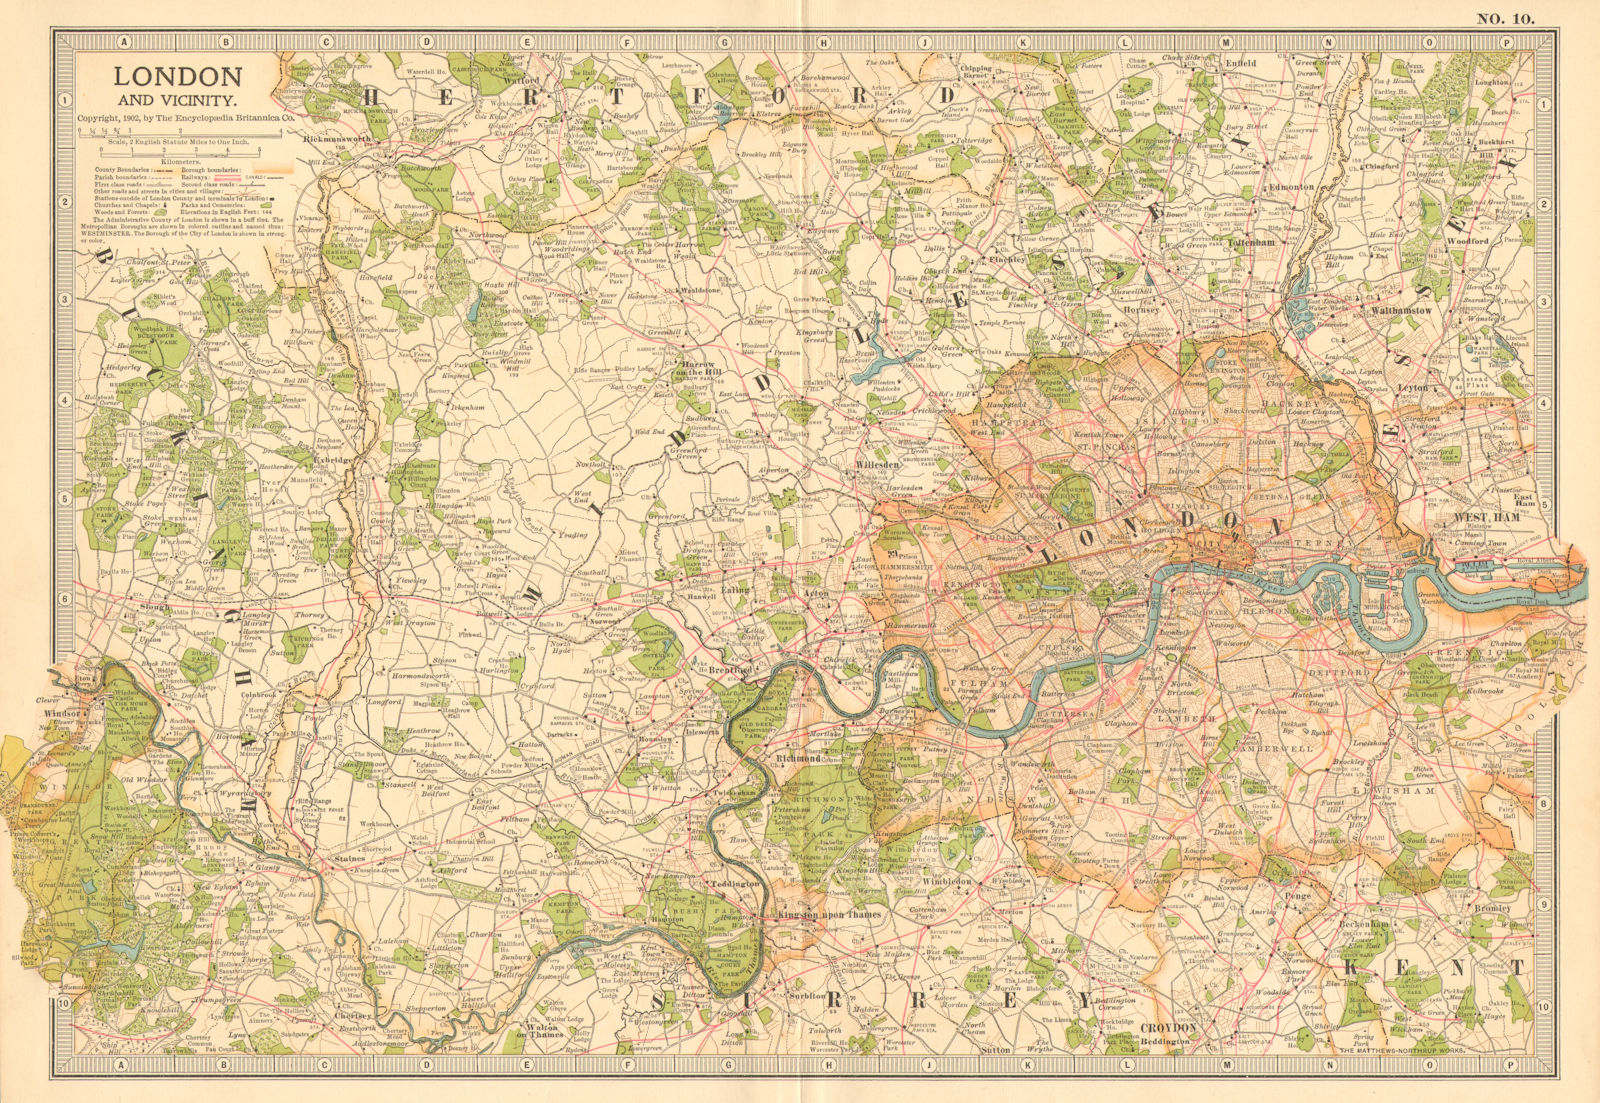 Associate Product LONDON & VICINITY.Thames valley. Middlesex Surrey Buckinghamshire 1903 old map